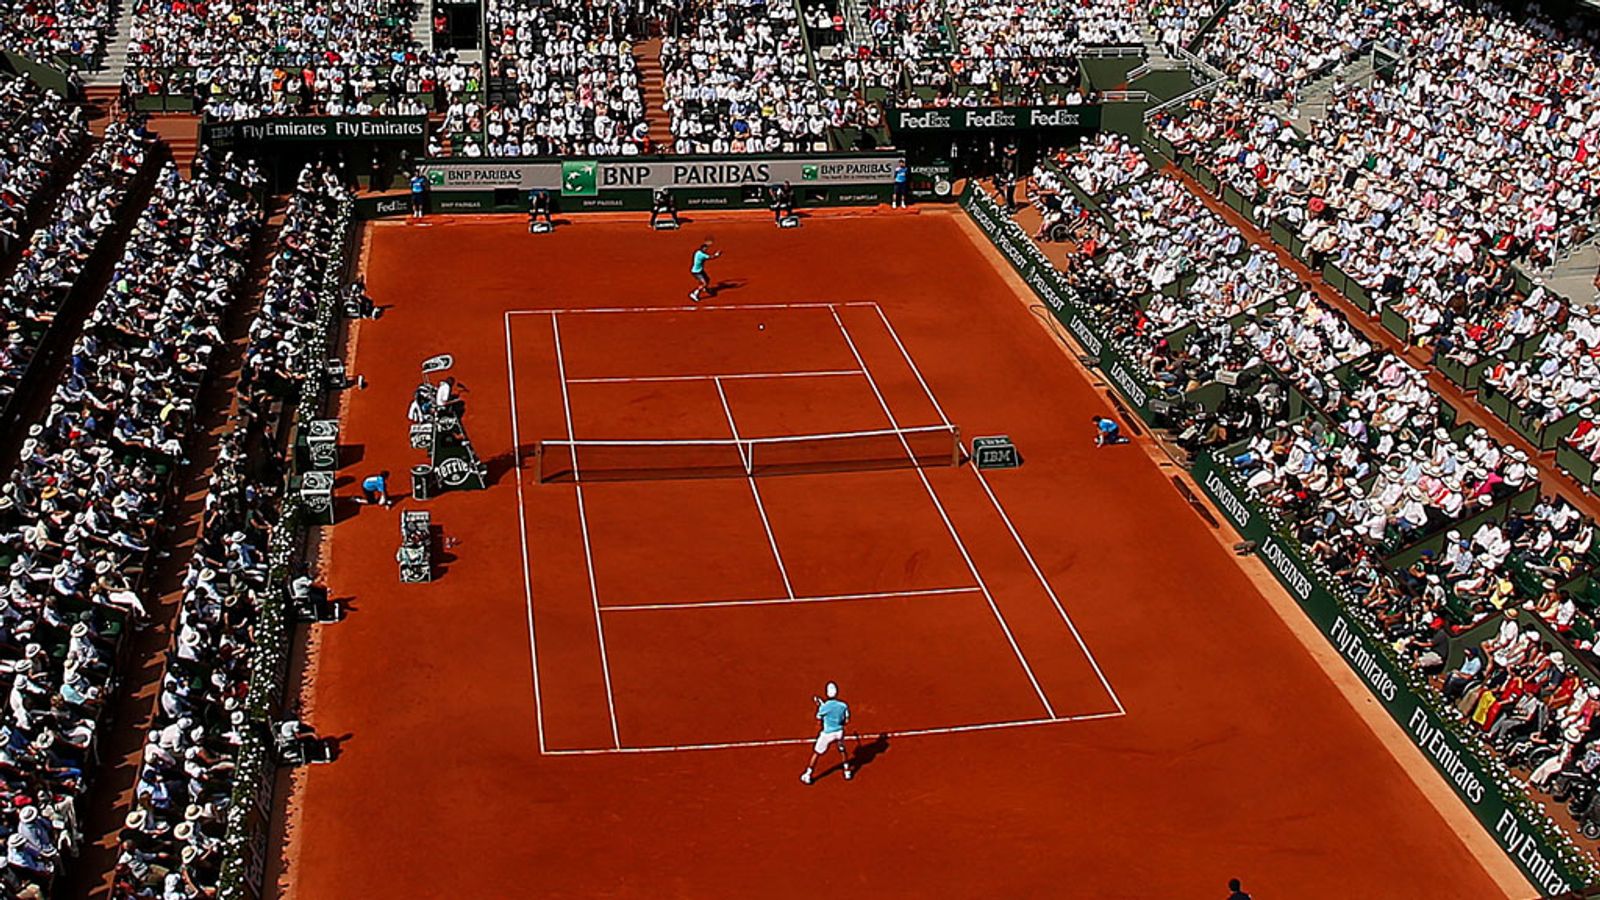 Retractable roof for Court Philippe Chatrier at Roland Garros | Tennis